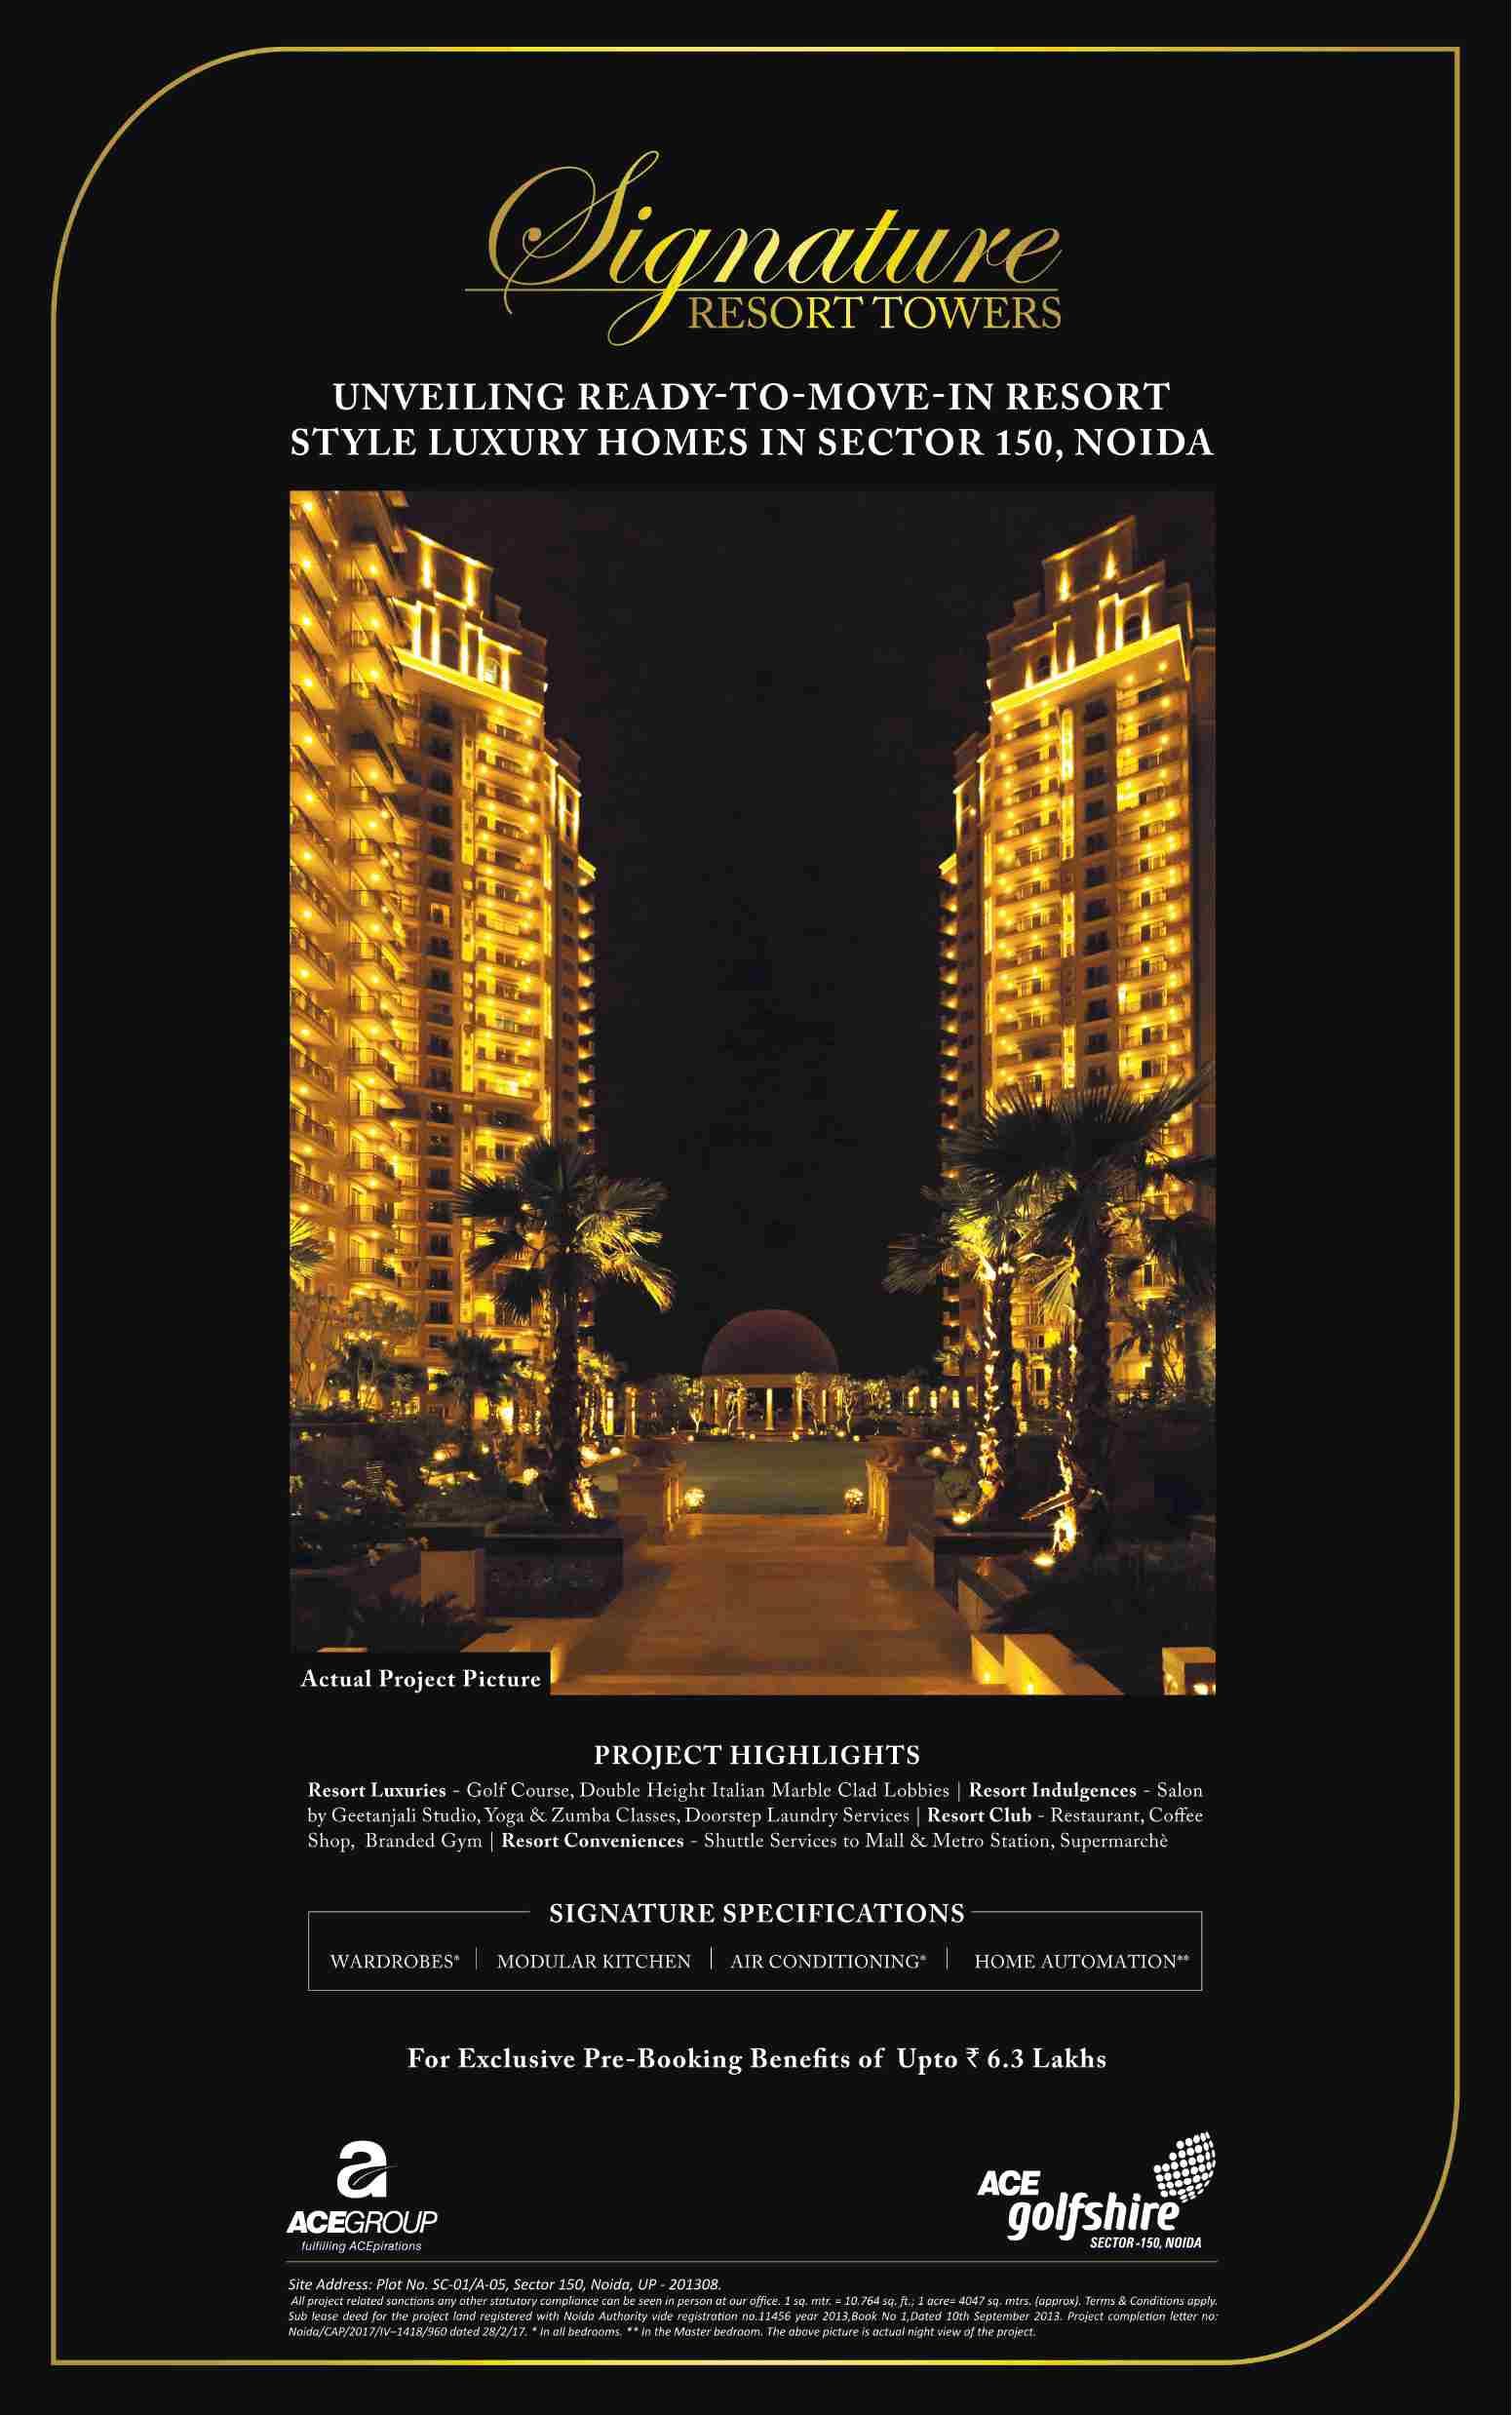 Signature Resort Towers coming soon at Ace Golfshire in Noida